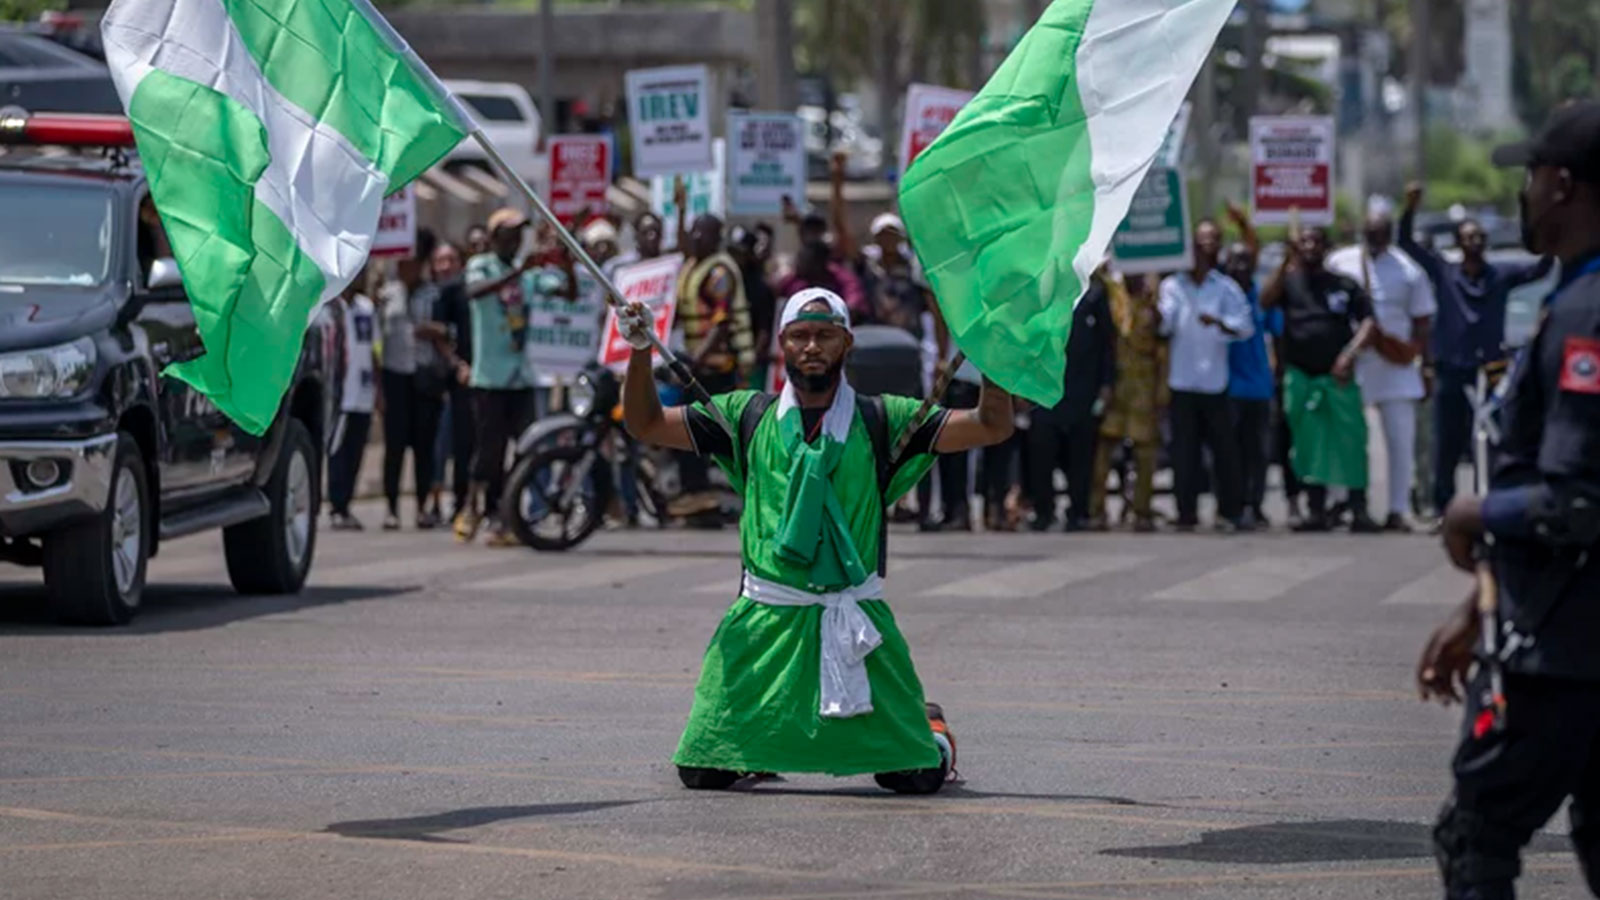 A demonstrator holds two Nigerian flags as he and others accusing the election commission of irregularities and disenfranchising voters make a protest in downtown Abuja, Nigeria.